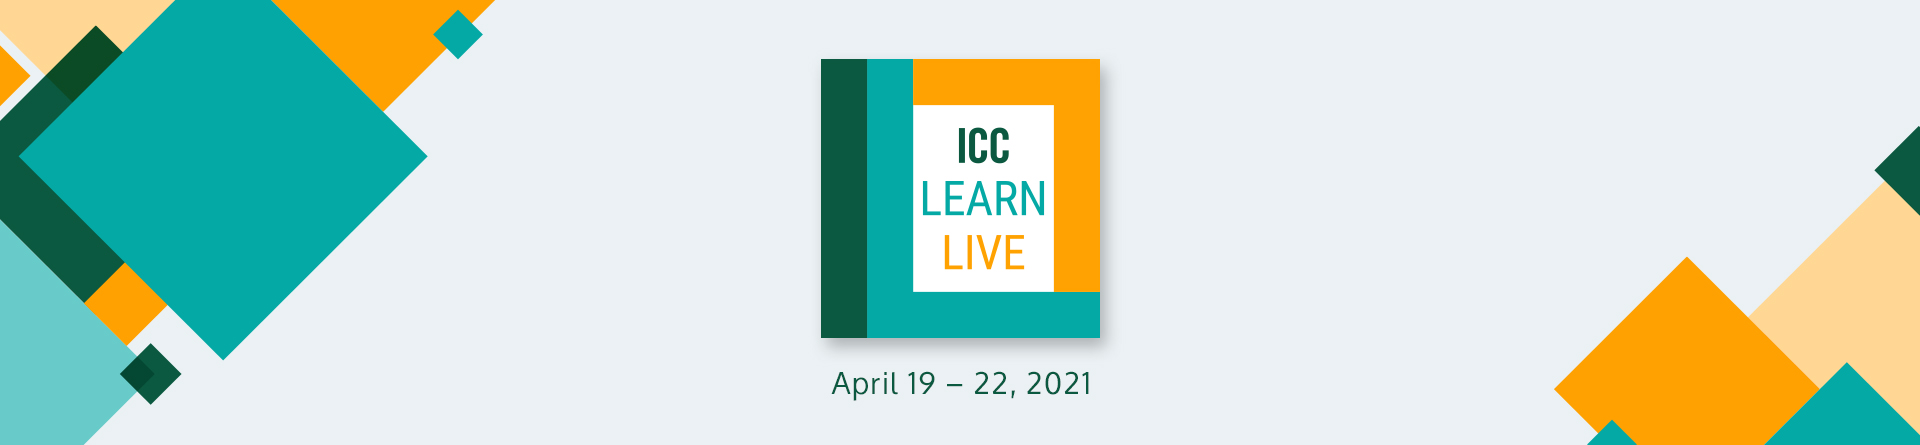 ICC Learn Live Sponsors 2021 Spring